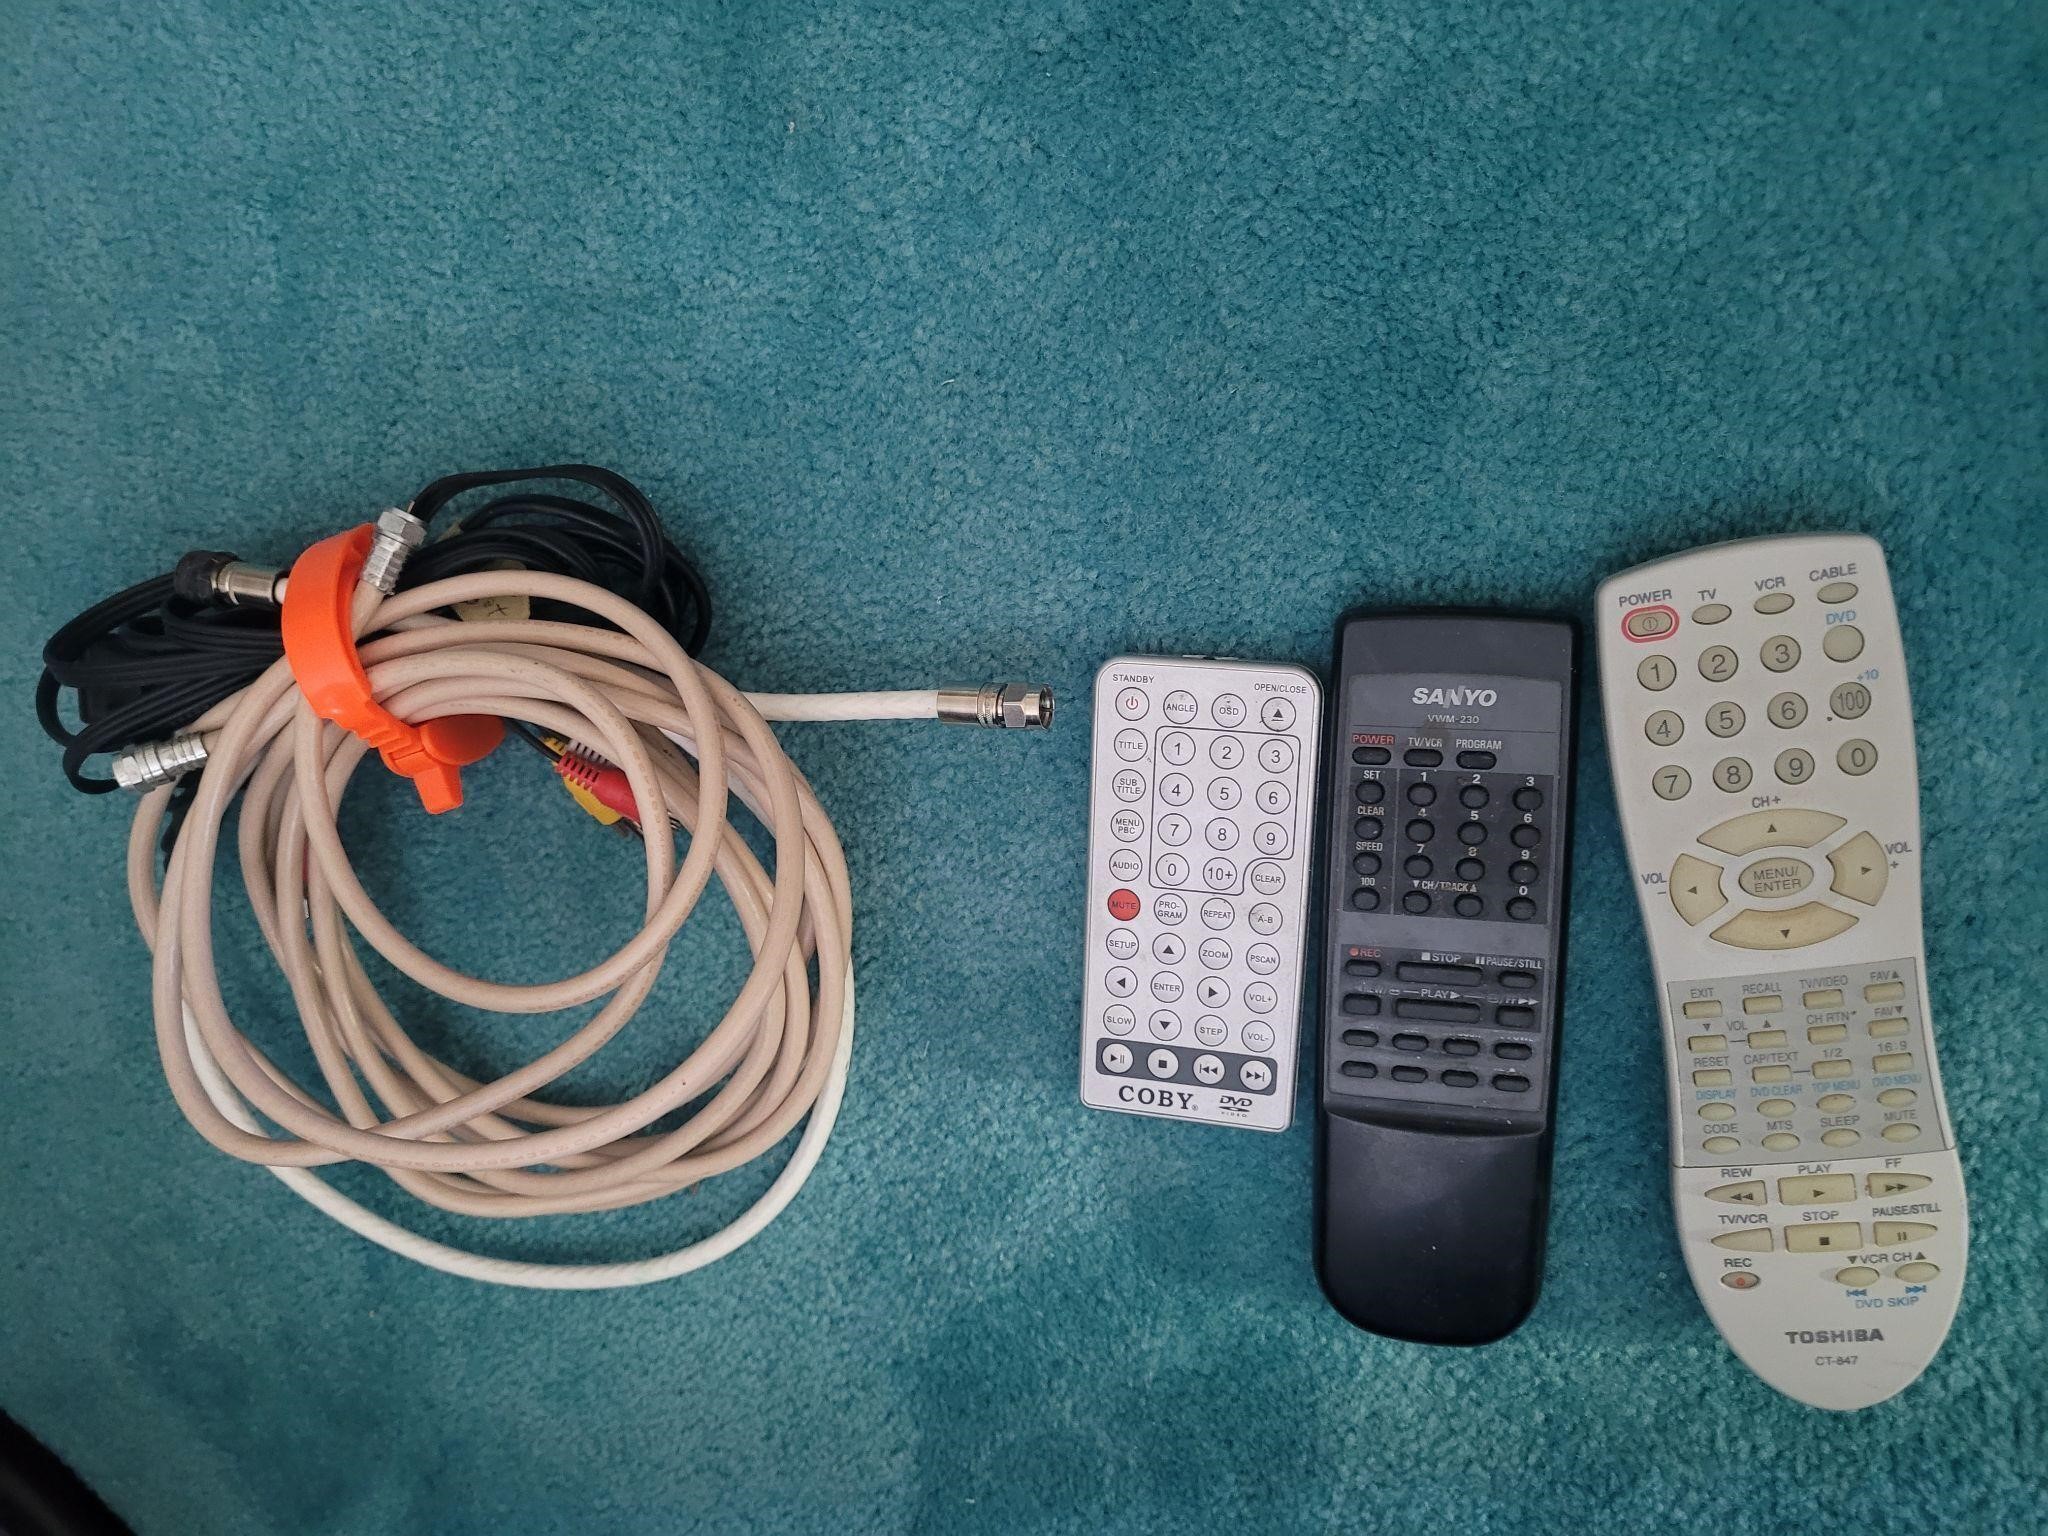 Tv remotes and cord